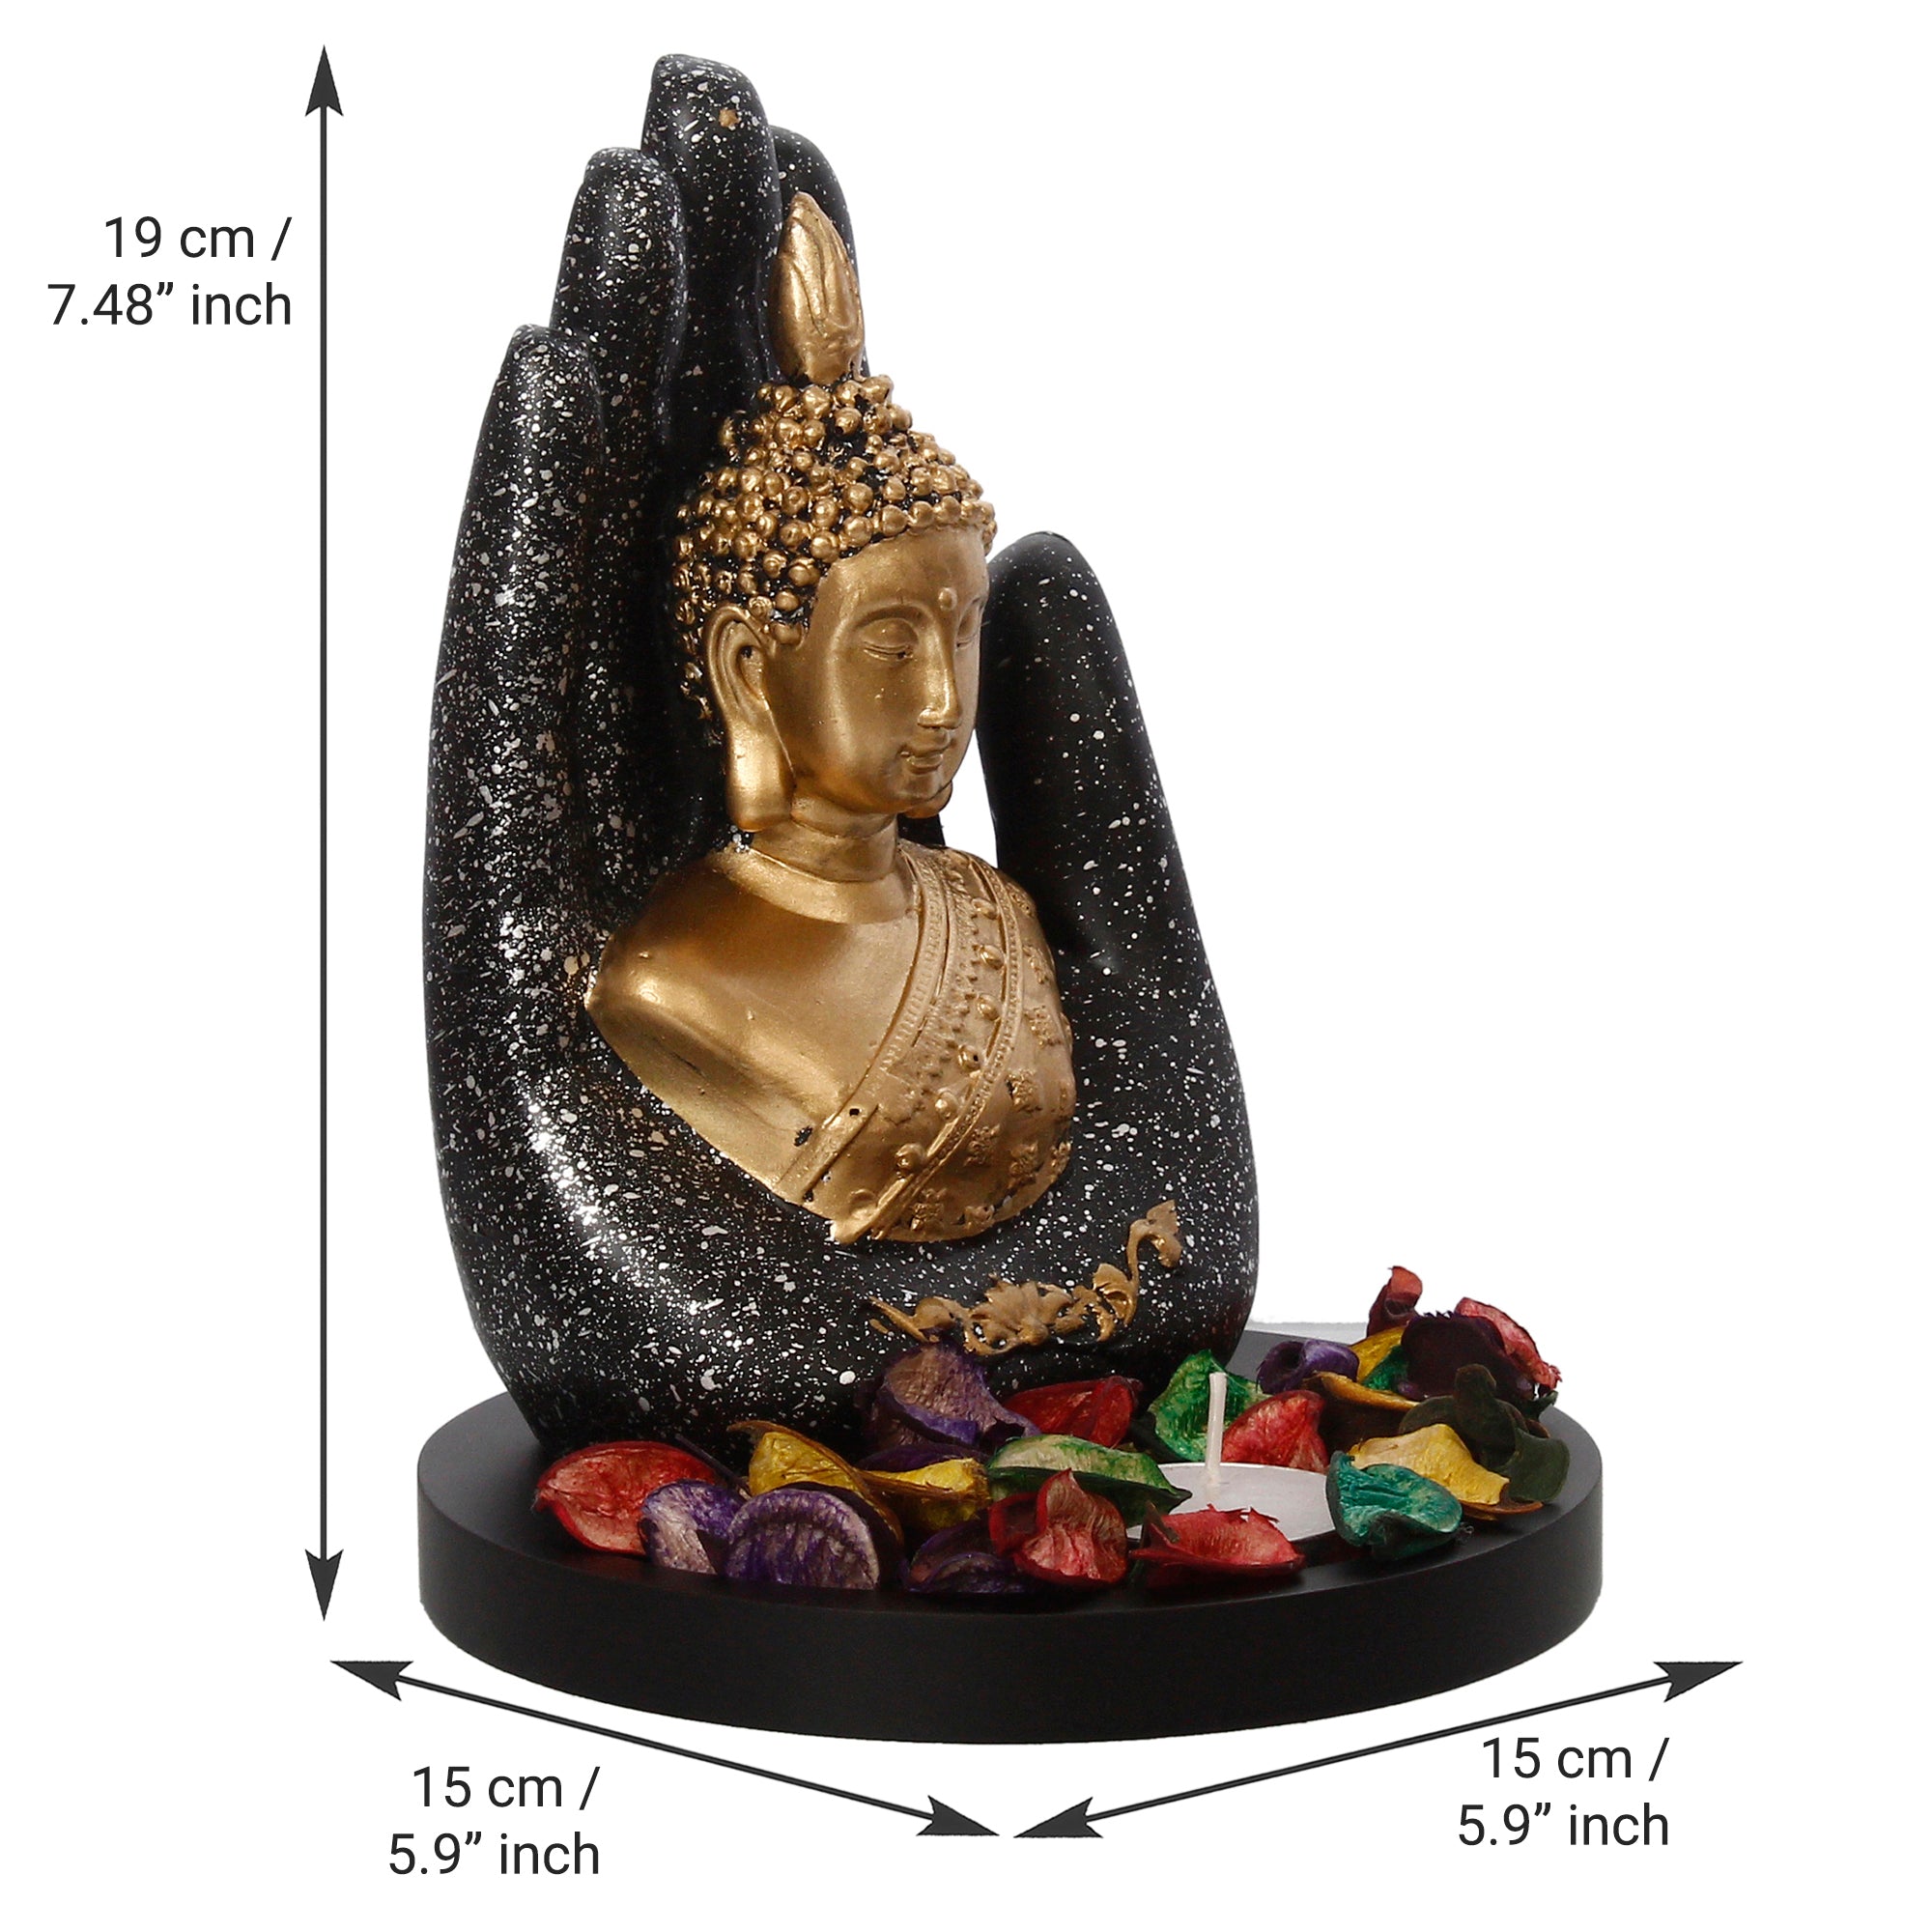 Polyresin Black and Golden Handcrafted Palm Buddha Statue with Wooden Base, Fragranced Petals and Tealight 3